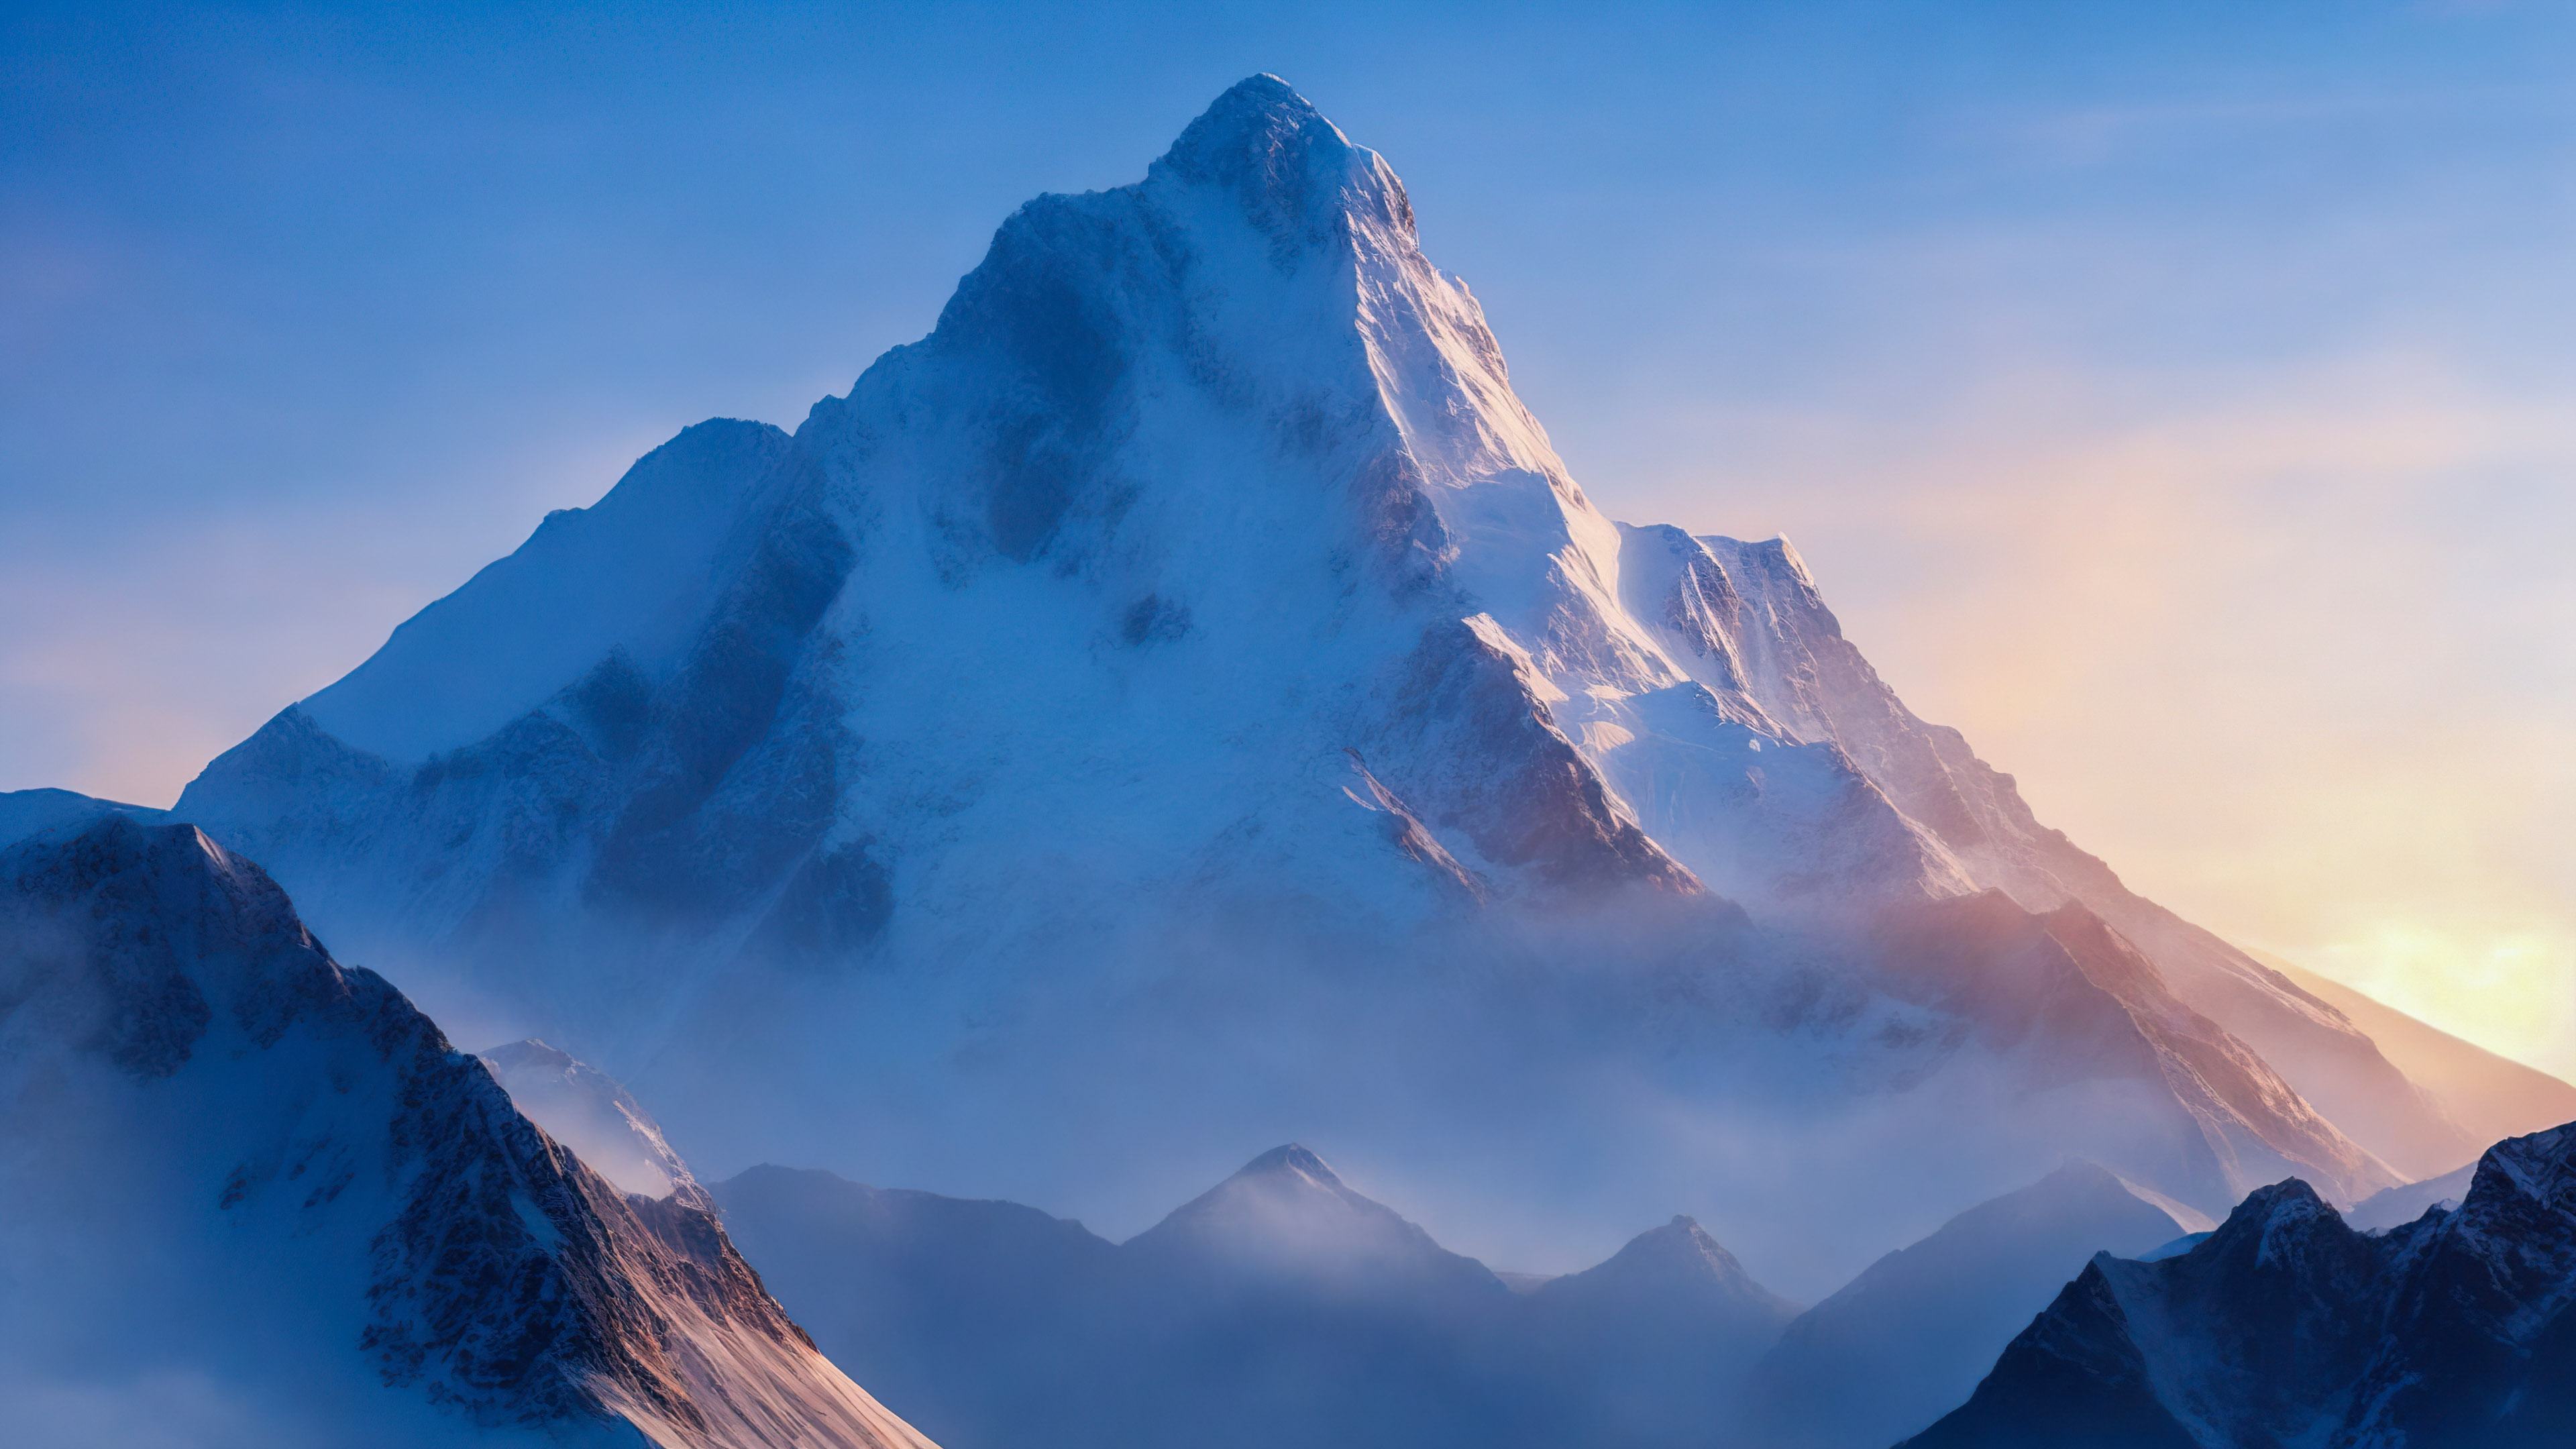 Experience the grandeur of our 4k beautiful nature wallpaper, featuring a picturesque mountain peak kissed by the first light of dawn under a pale blue sky.